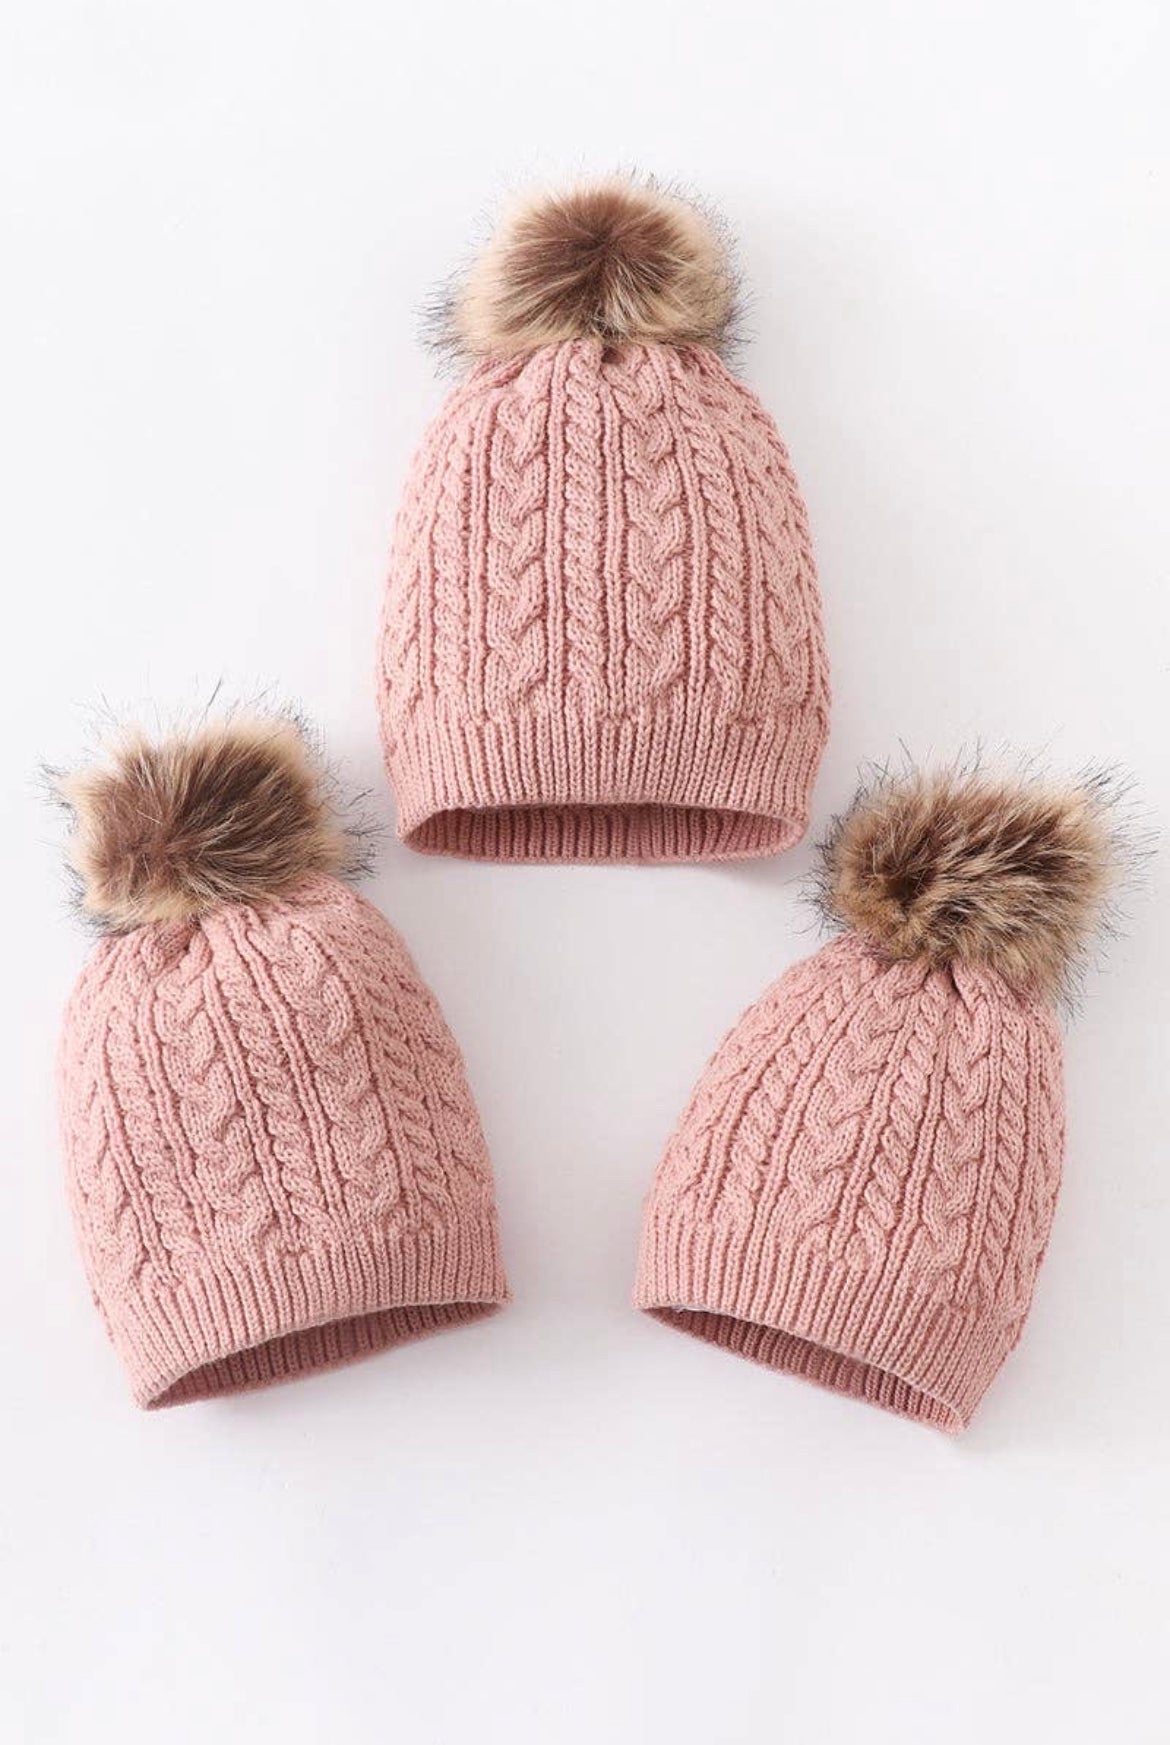 Rose Pink Beanie - Cable Knit Hat - Pom Pom Beanie - Cable Beanie - Lulus